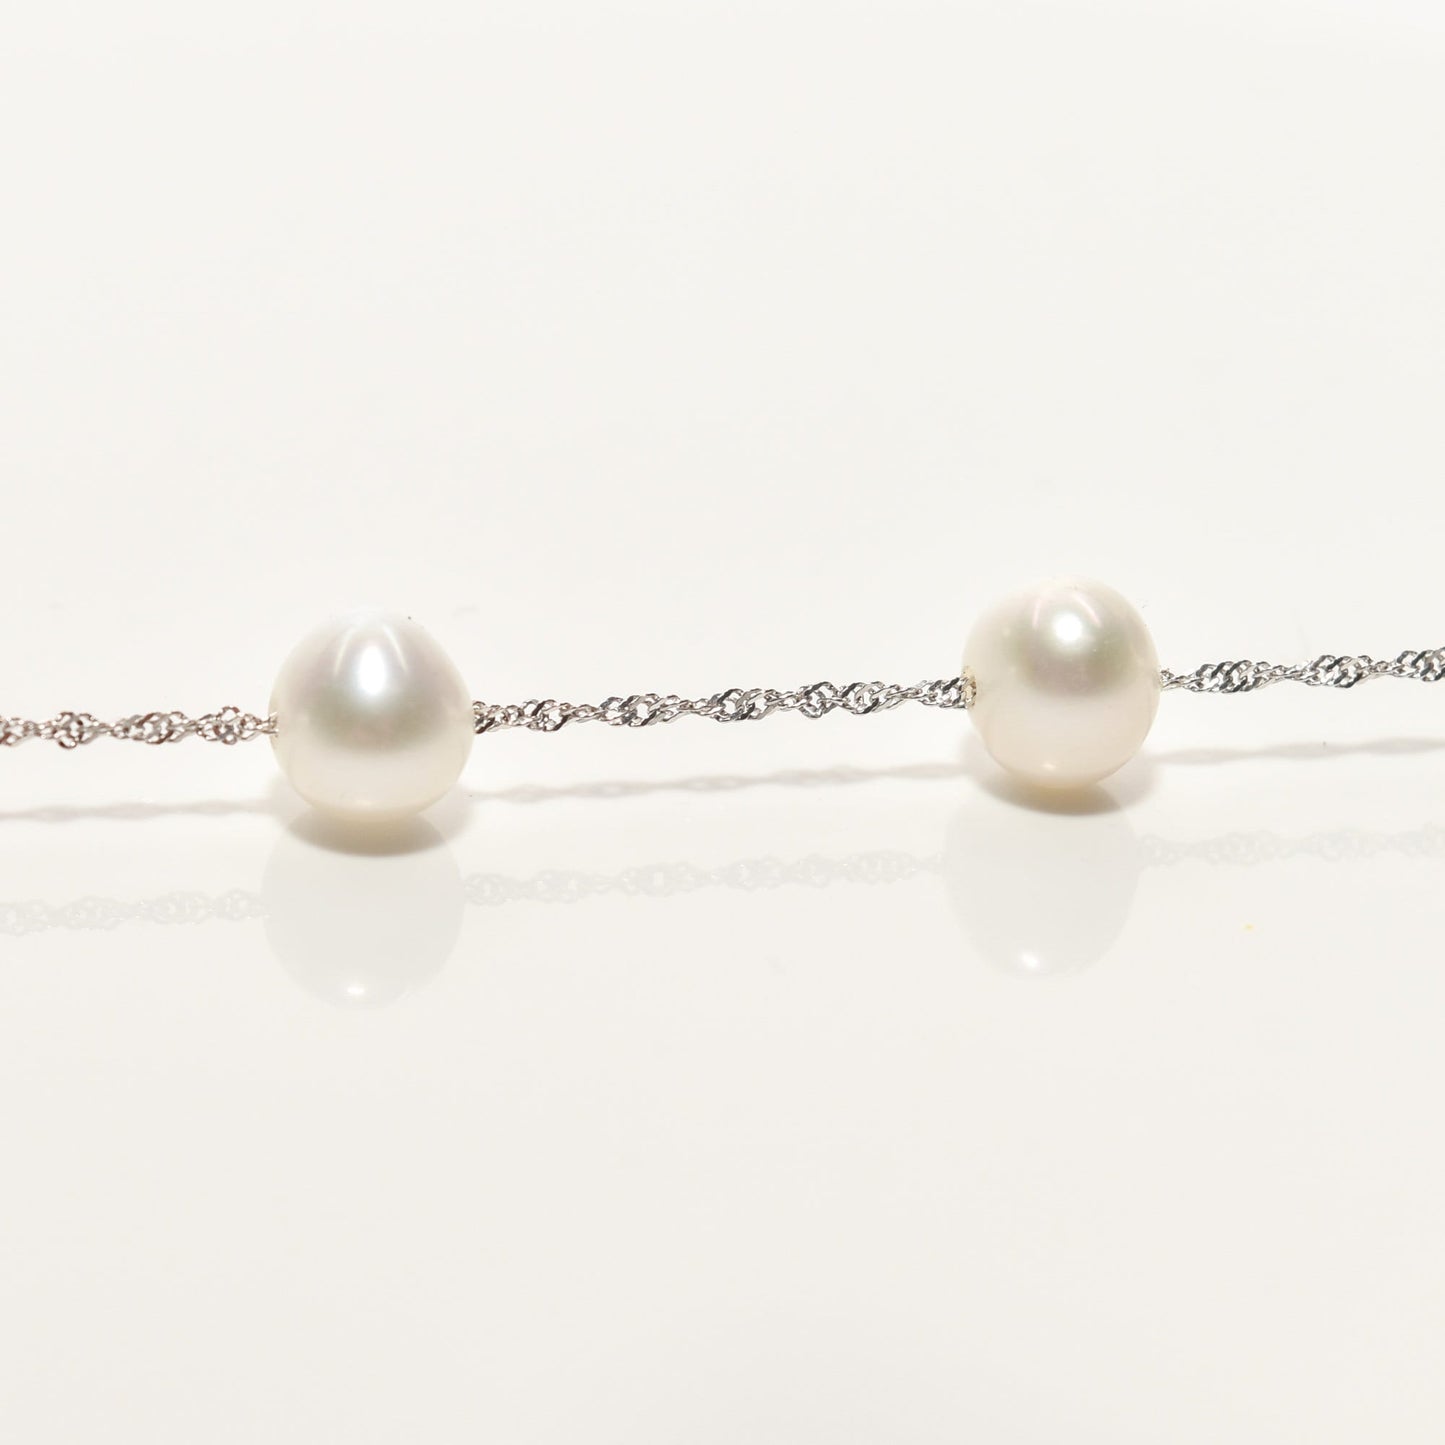 White pearl choker necklace in 14k white gold with pearl station design on a reflective surface, measuring 17.75 inches in length